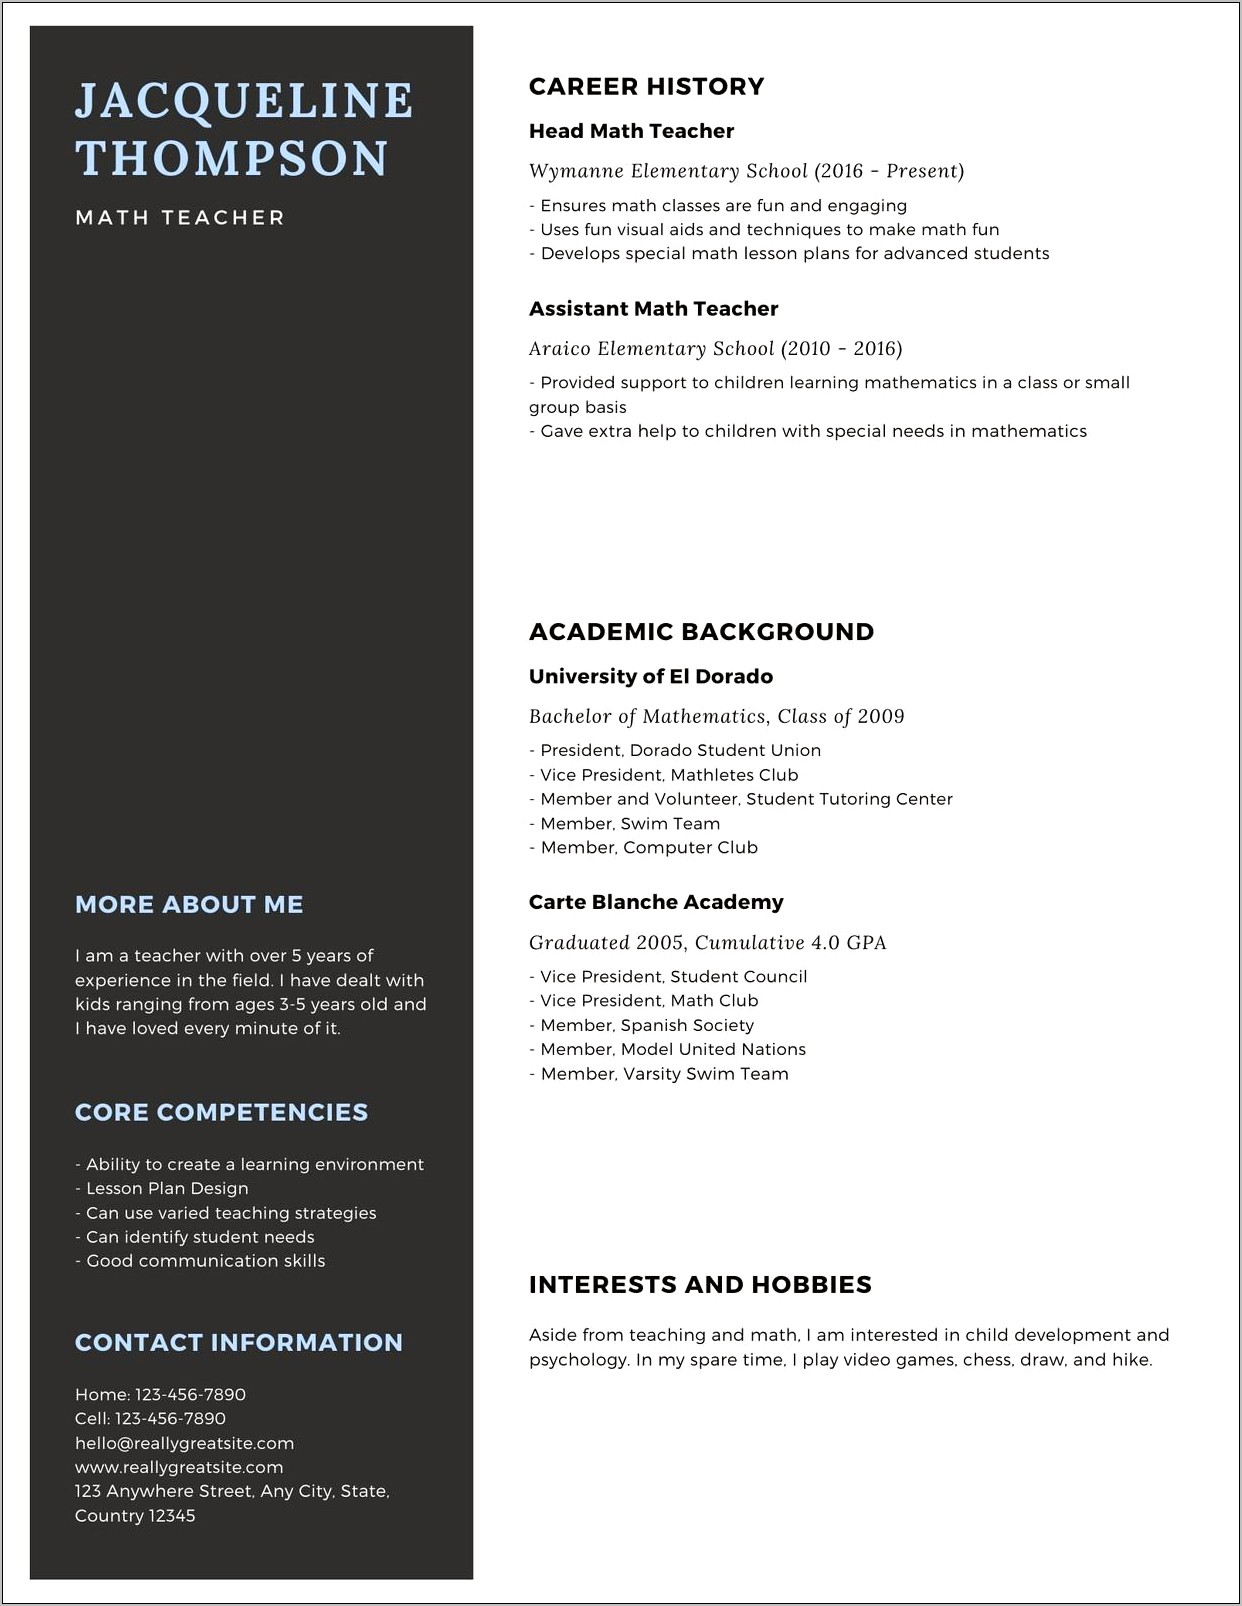 Canva Resume Template Gray With Boxes